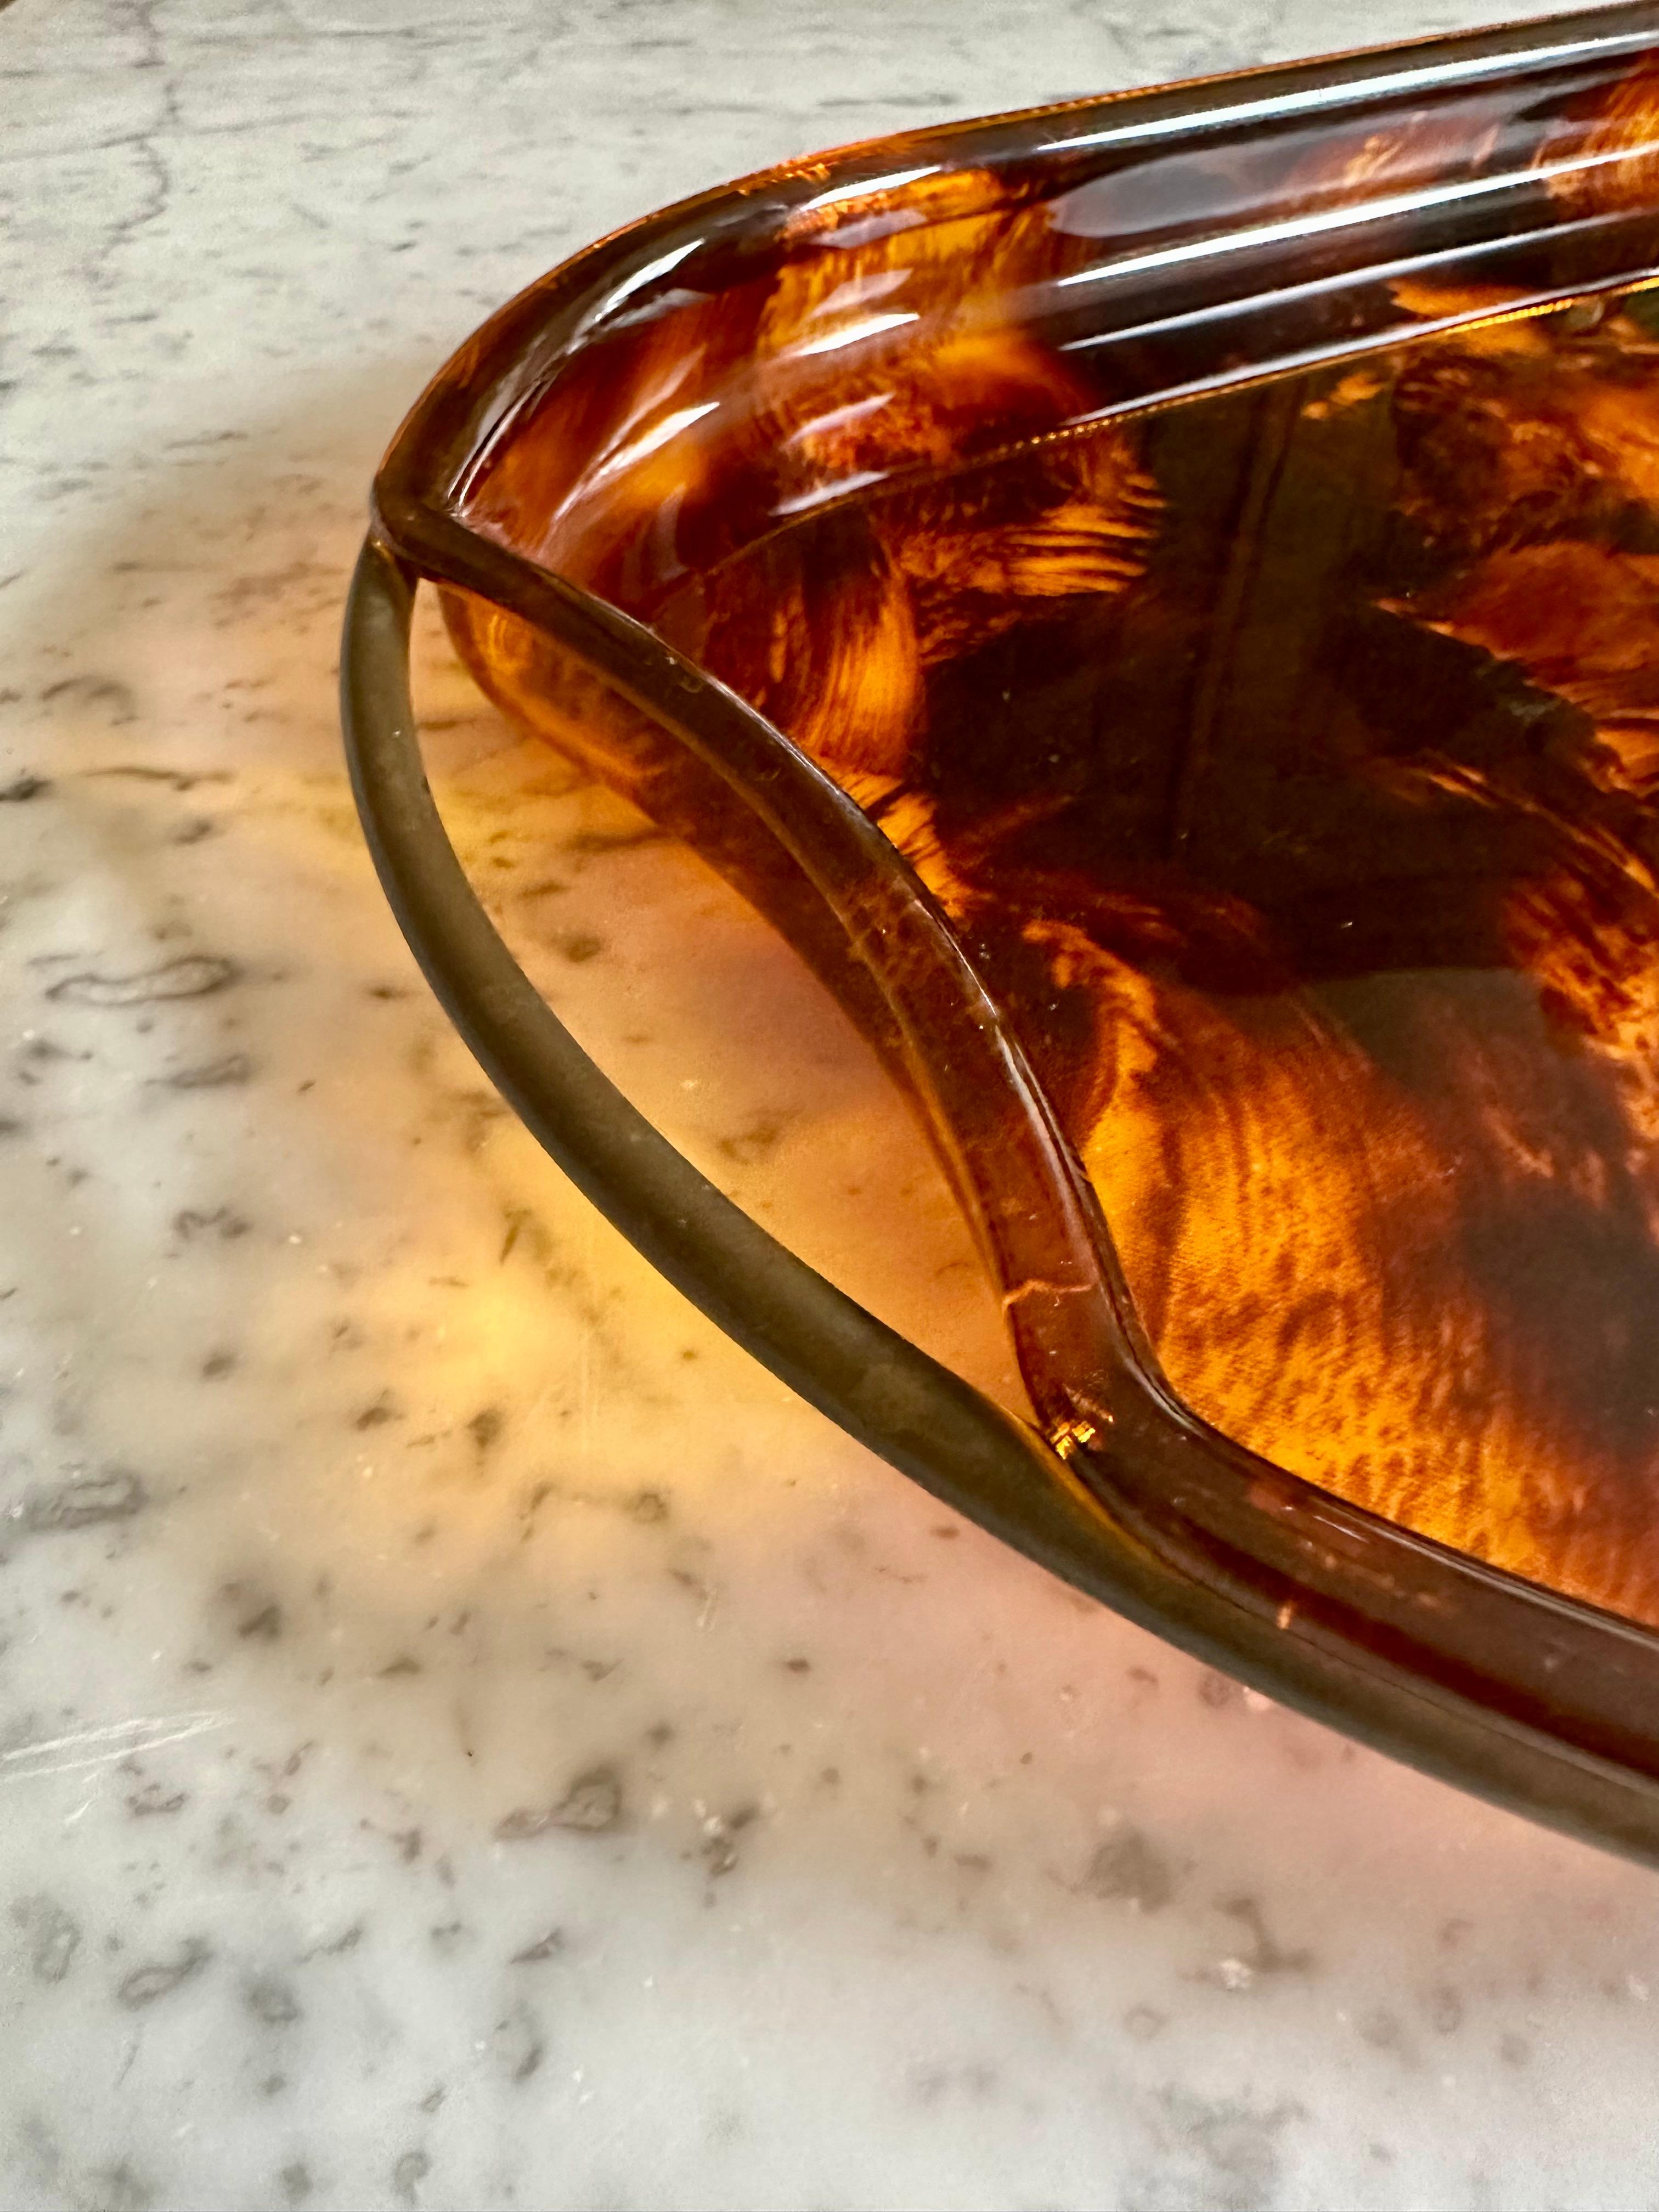  Guzzini’s Oval Lucite Serving Tray from 1970s Italy – Faux Tortoiseshell -brass In Good Condition For Sale In Hamburg, DE